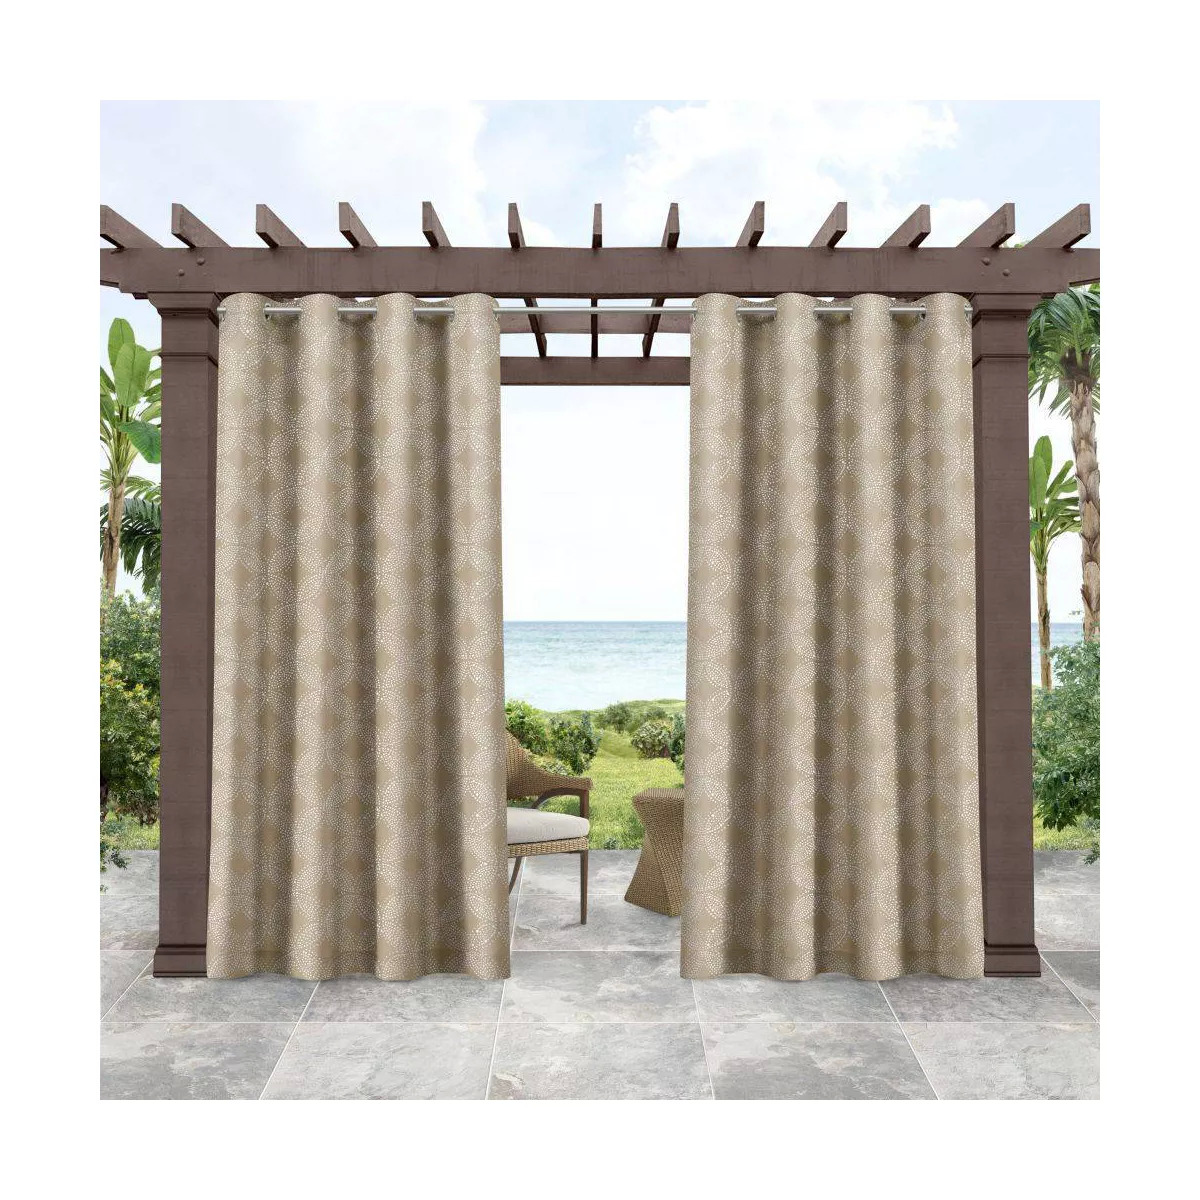 2-Pack Tommy Bahama Indoor/Outdoor Island Curtain Panels (Various Sizes & Colors) from  $8.70 + Free Store Pickup at Target or FS on $35+